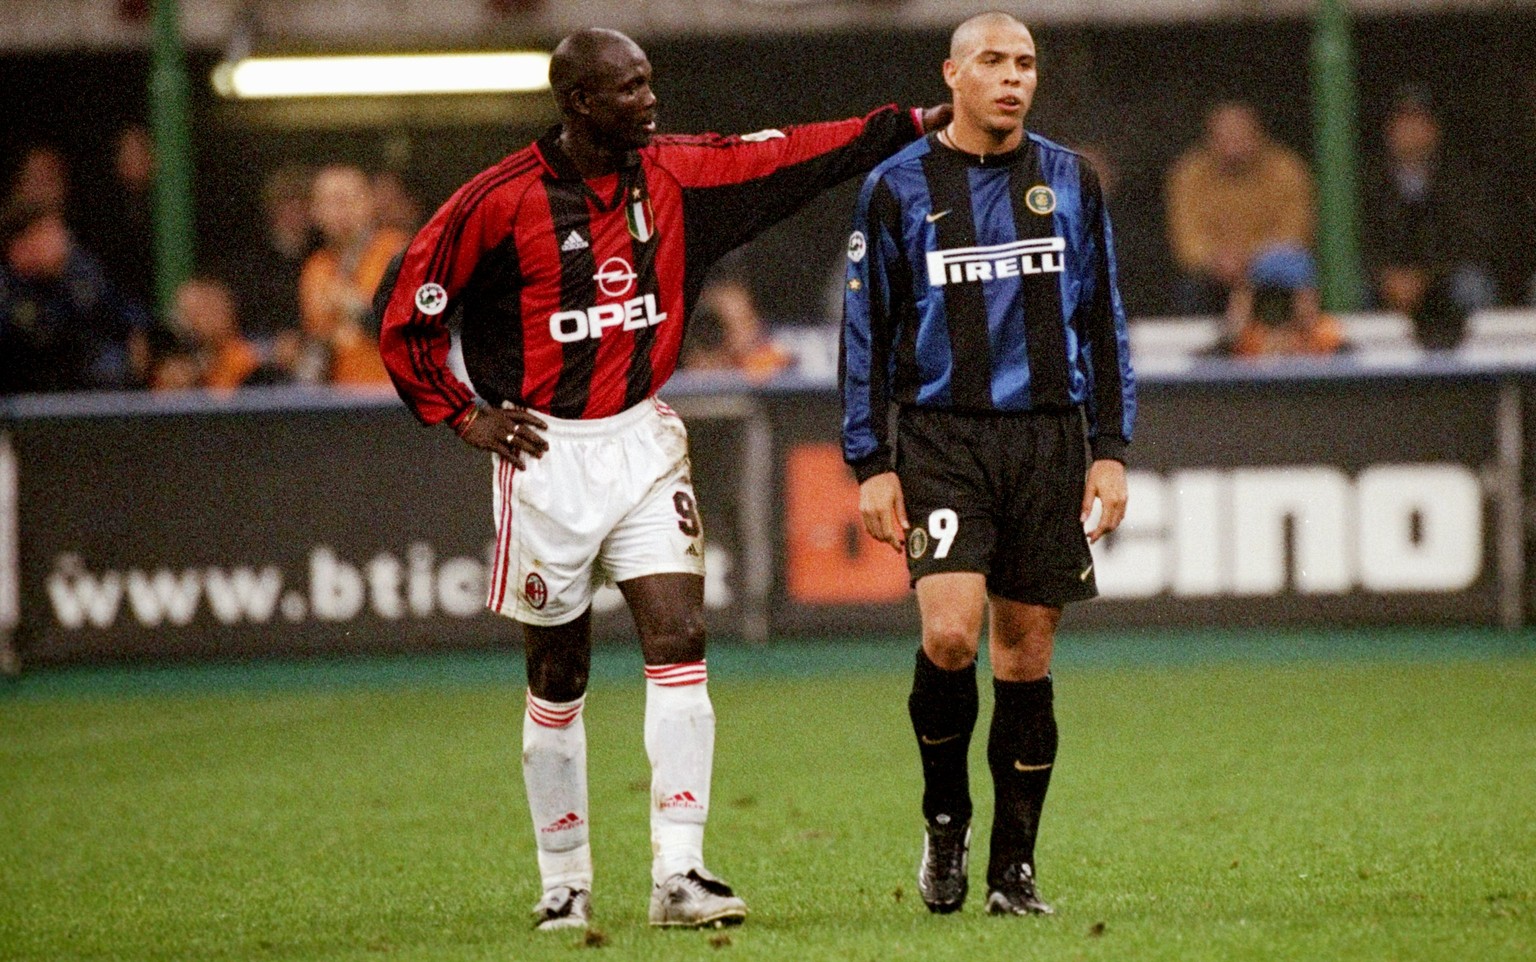 23 Oct 1999: George Weah of AC Milan consoles Ronaldo of Inter Milan after his sending off during the Serie A match at the San Siro in Milan, Italy. \ Mandatory Credit: Claudio Villa /Allsport